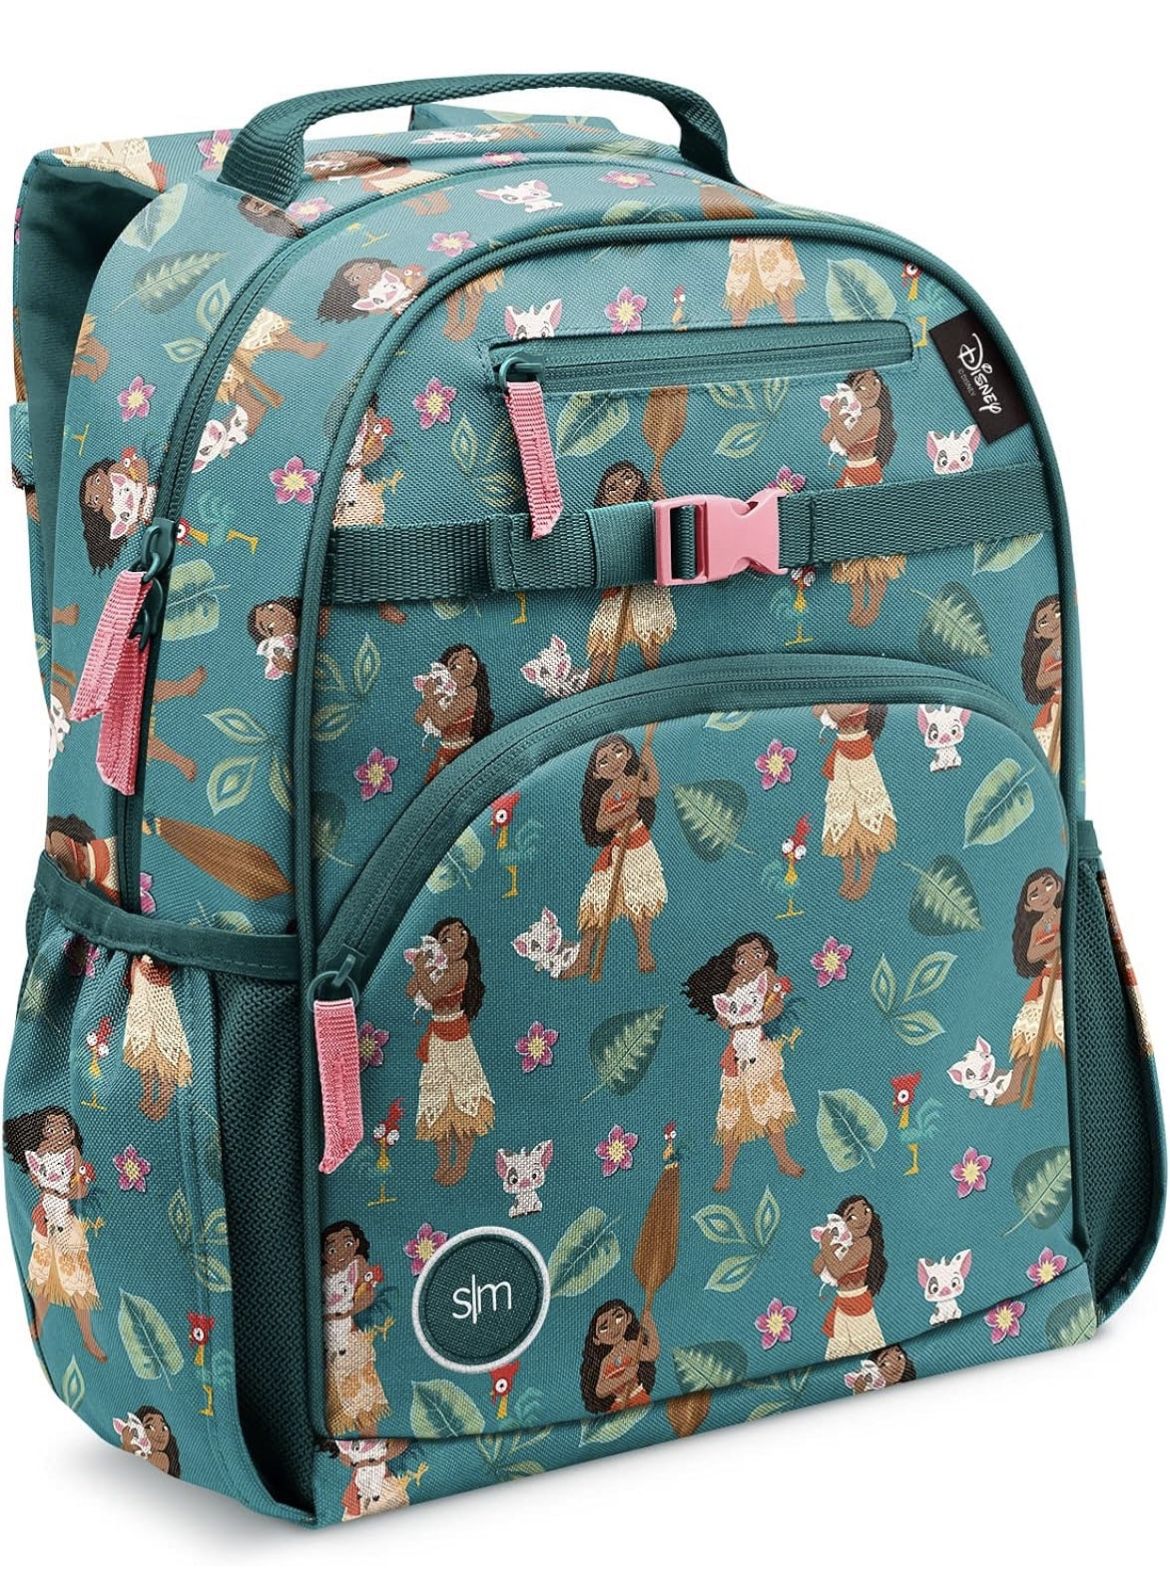 Disney Simple, Modern New Moana Backpack. It Is Smaller So Great For A Kindergartener or smaller elementary school child